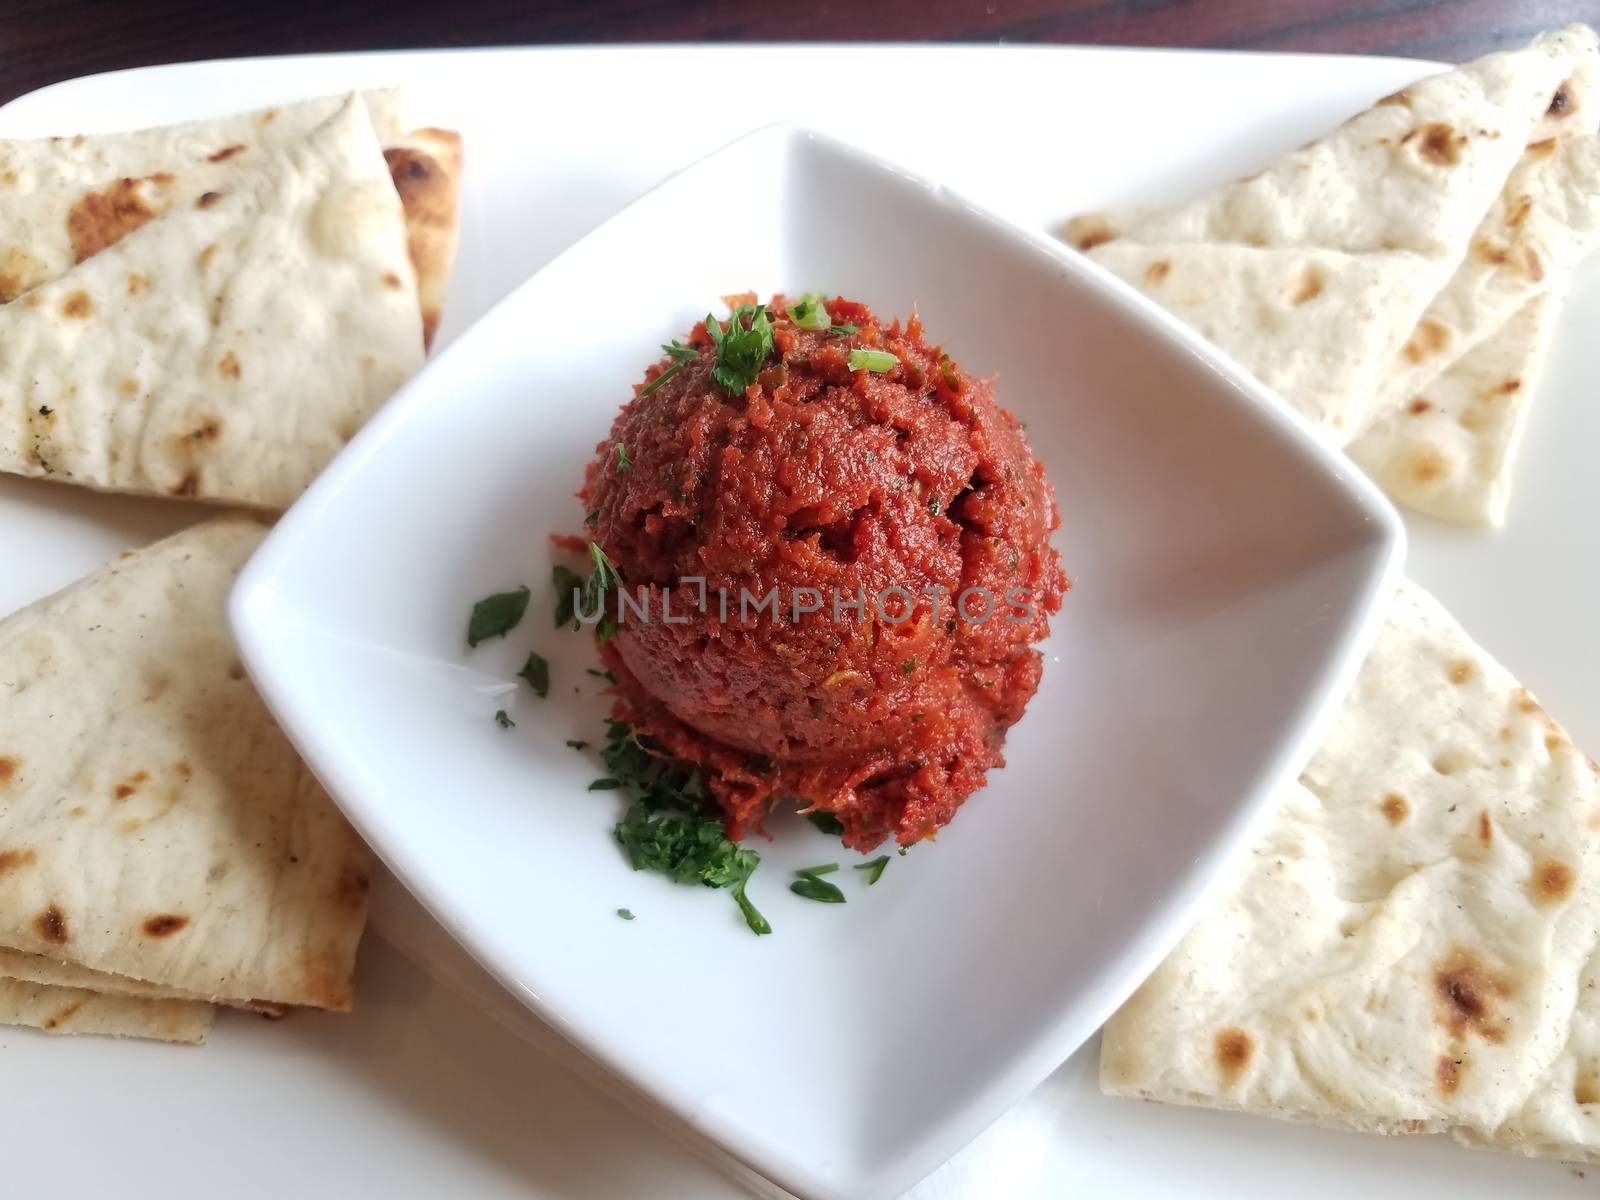 spicy red Greek mediterranean dip with bread triangles on white plate